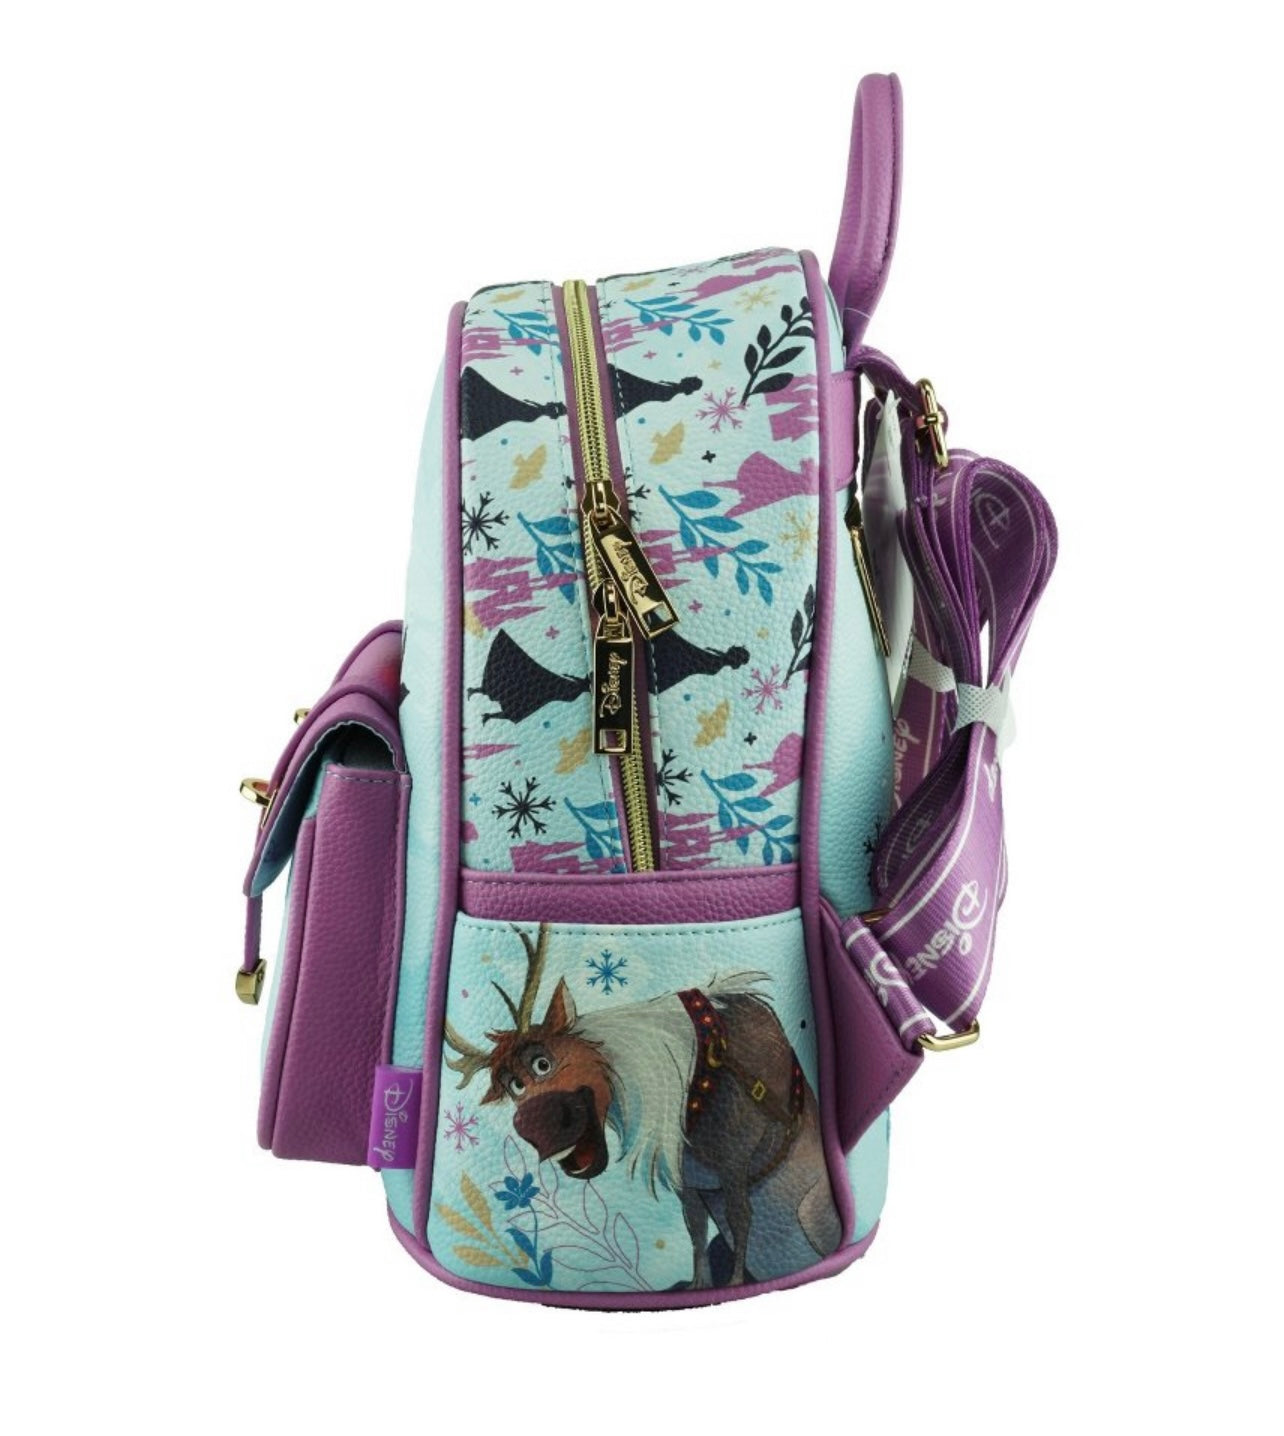 New Frozen Leather Mini Backpack